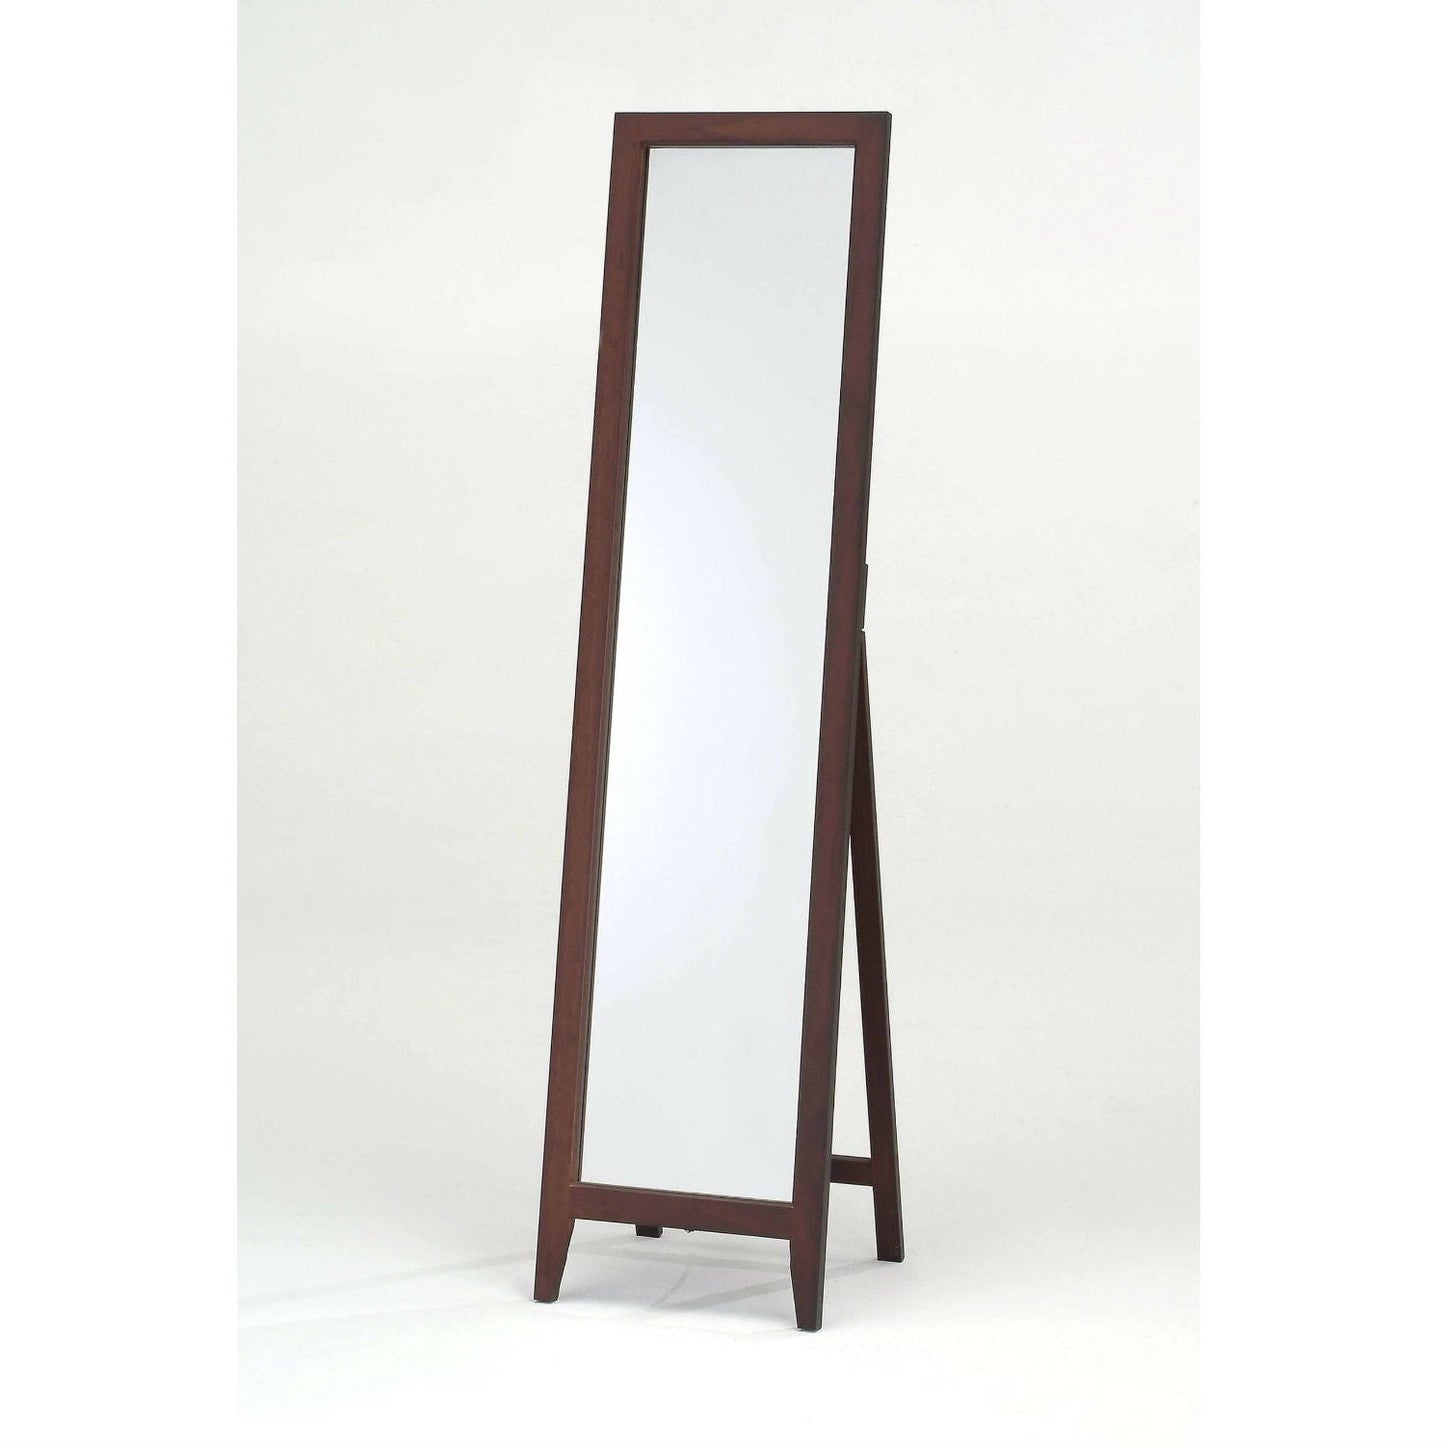 Accents > Mirrors - Contemporary Solid Wood Floor Mirror In Walnut Finish